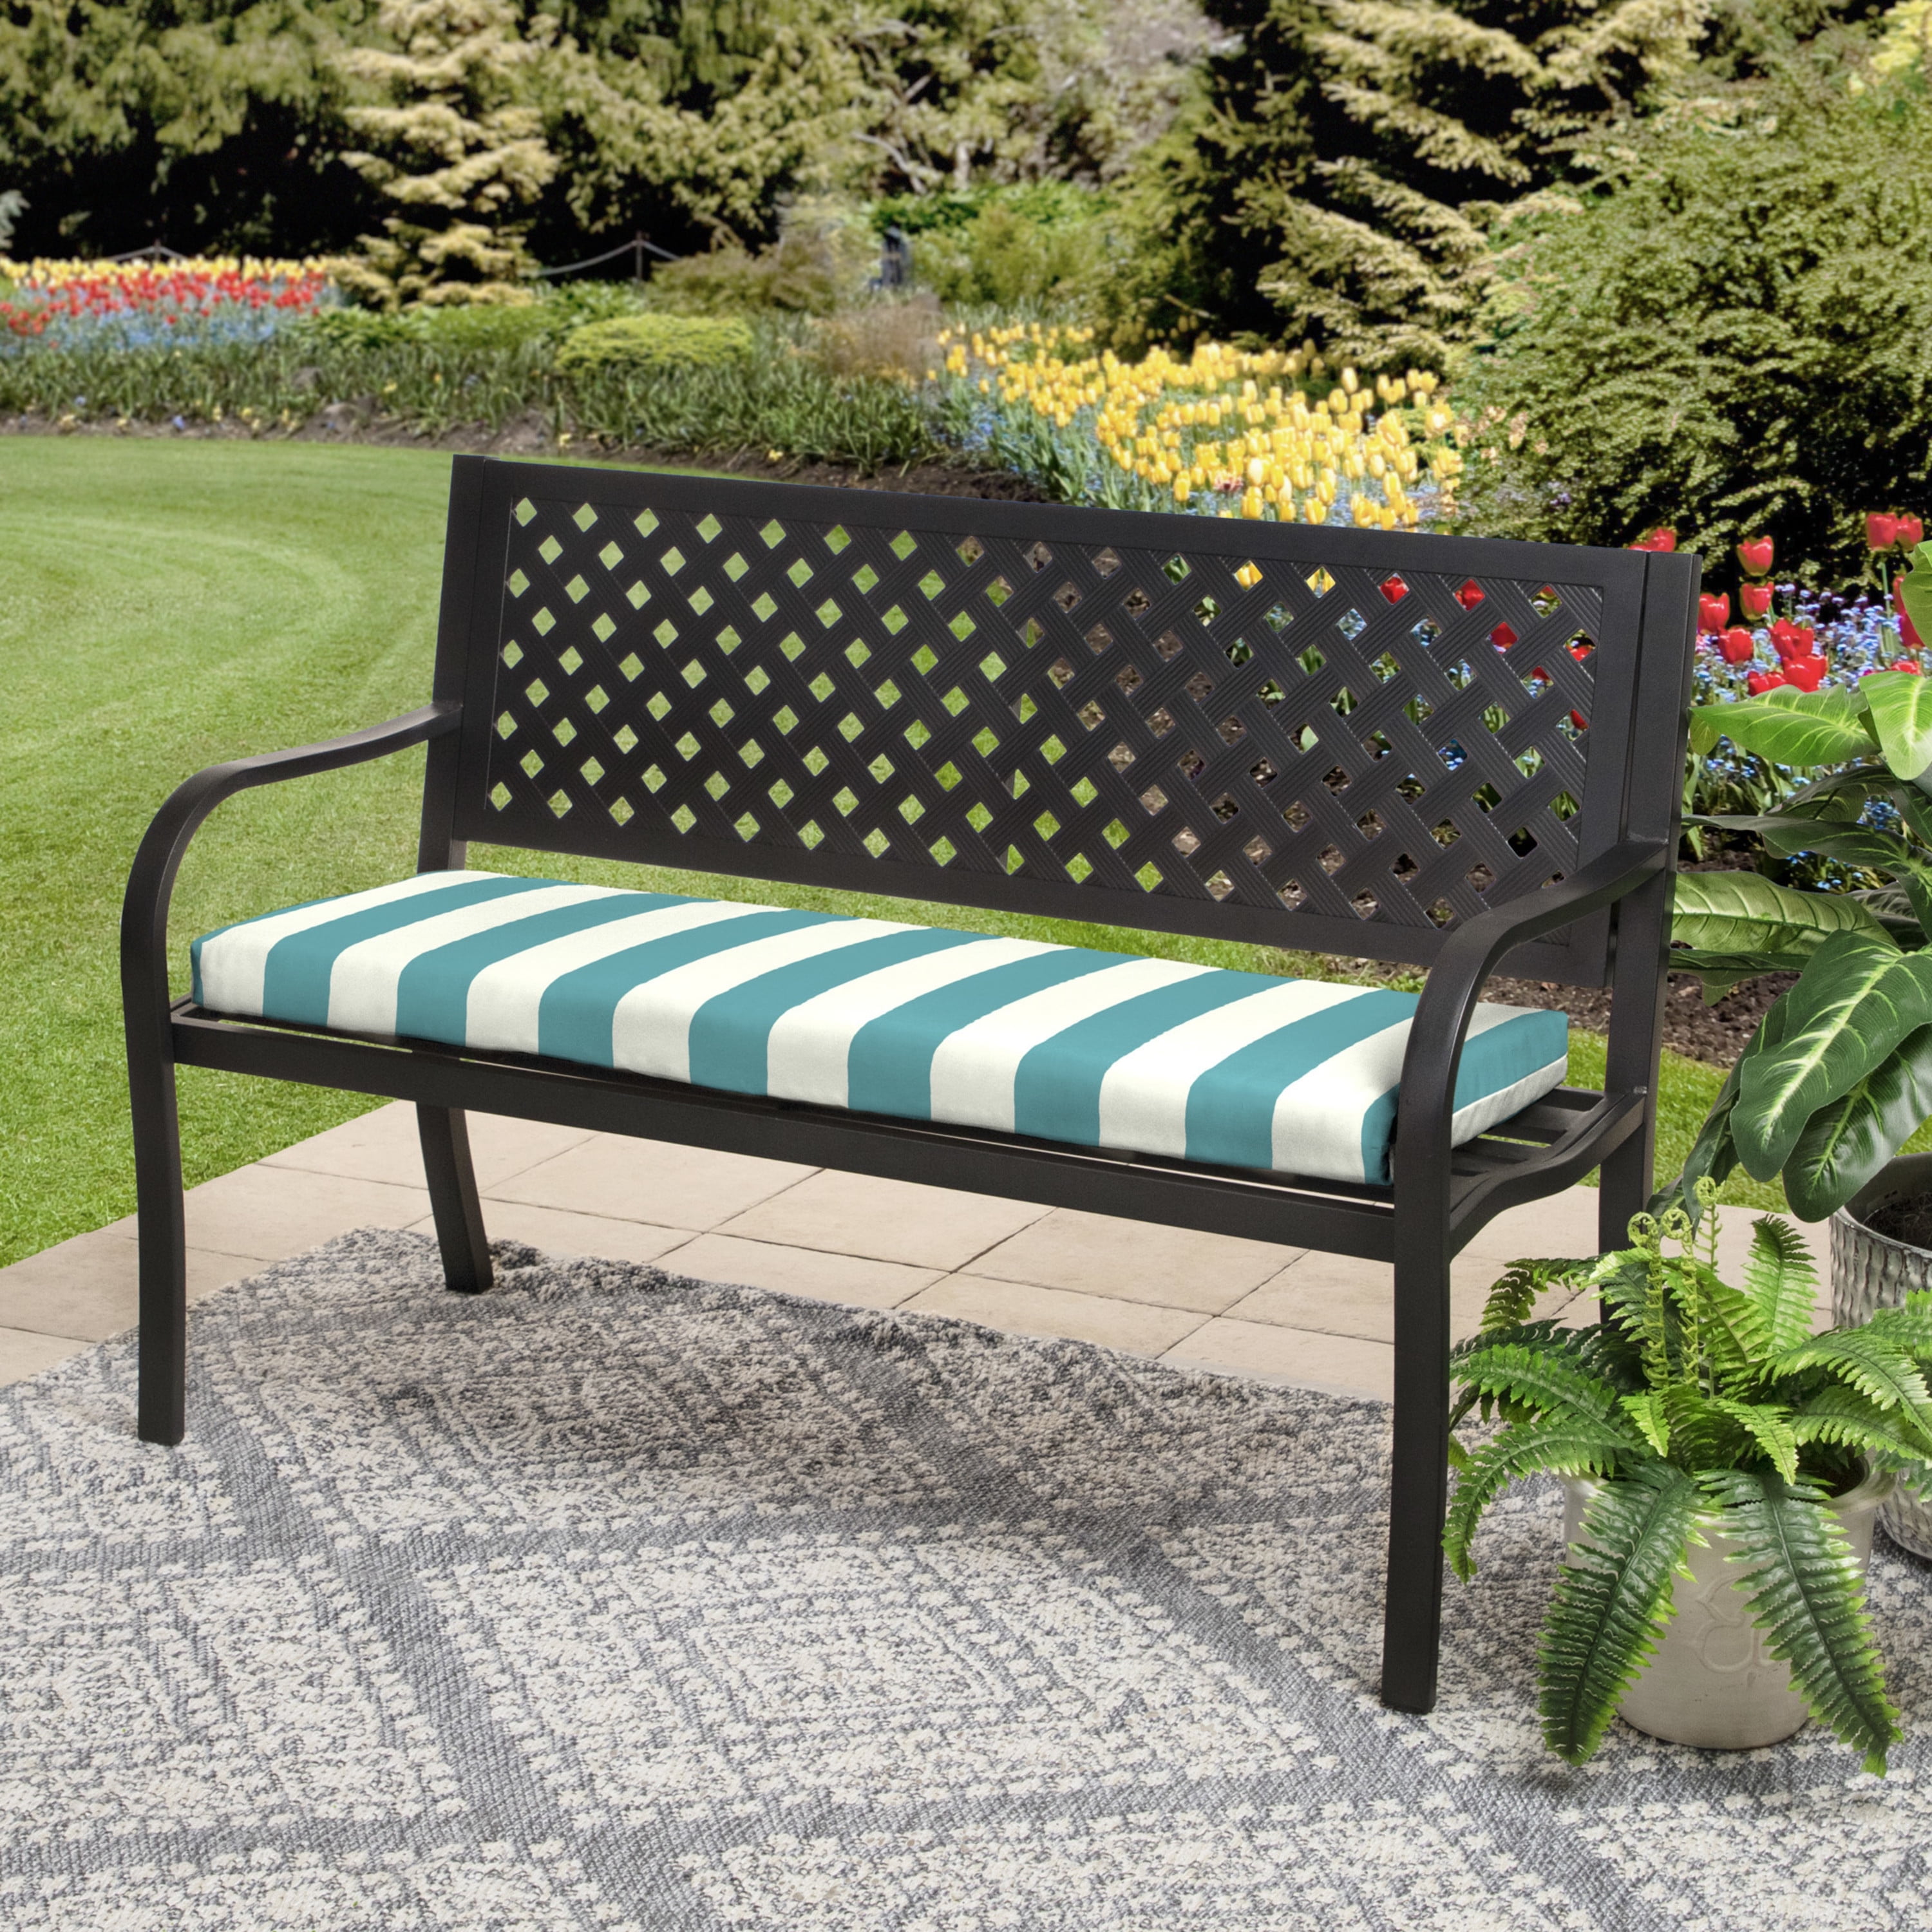 Mainstays 15.5 x 17 Turquoise Stripe Rectangle Outdoor Seat Pad (2 Pack)